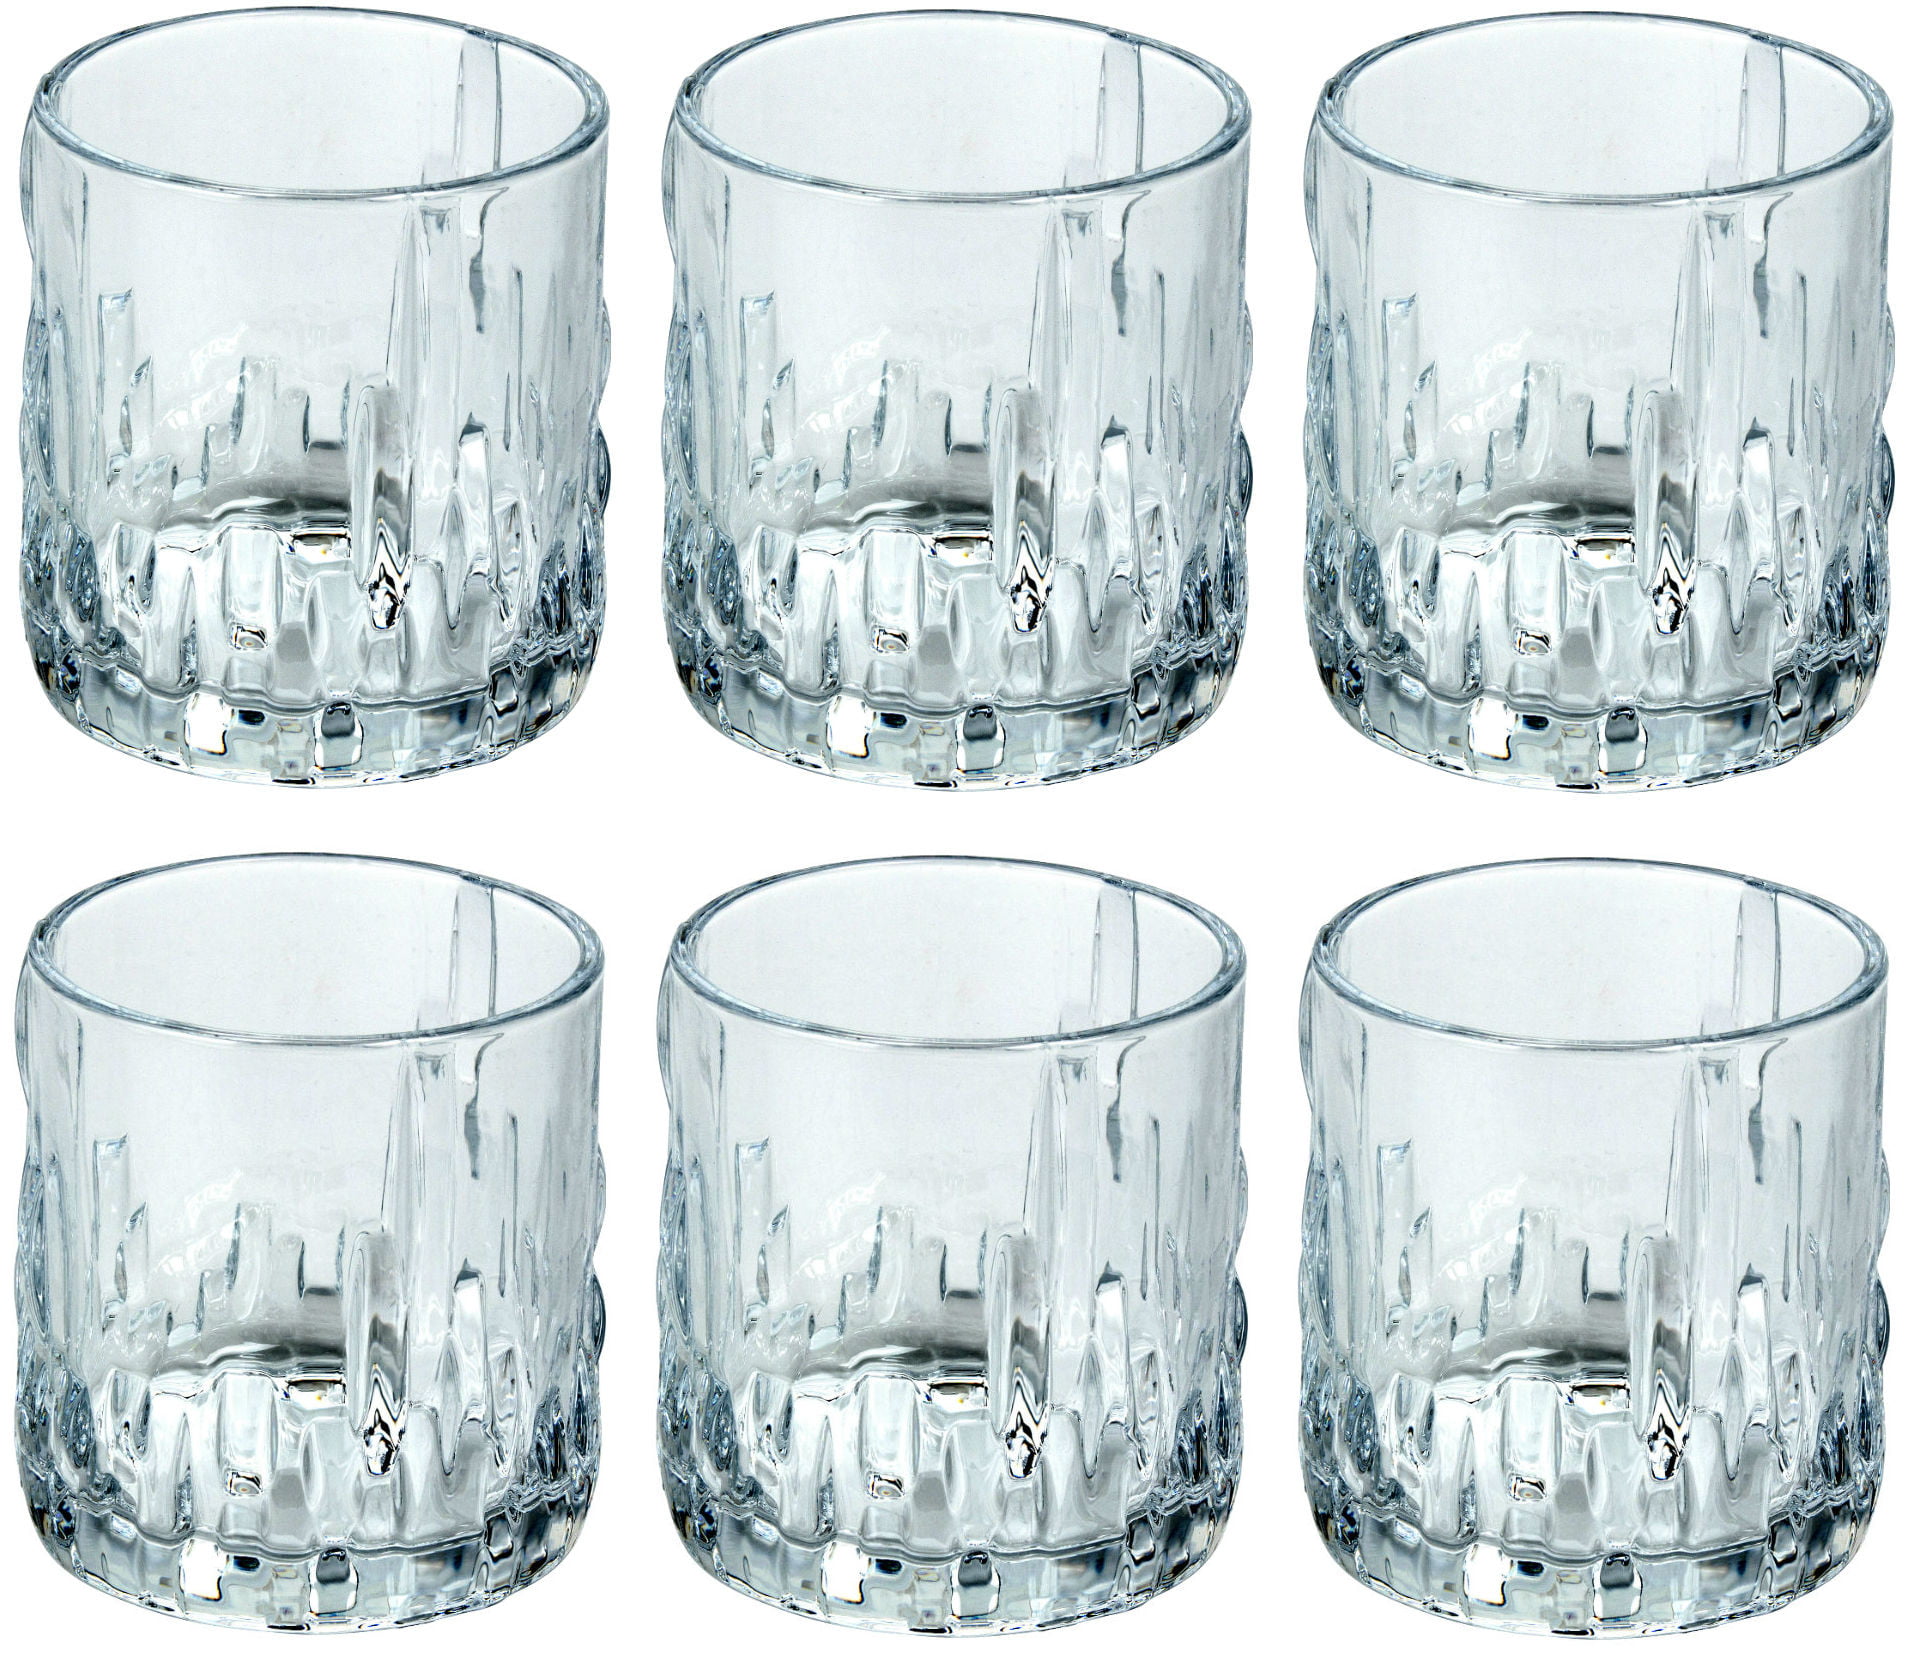 Glassware Drinkwar e 6PC Whisky Glasses Scotch Drinking Cups Old-Fashioned 9OZ 